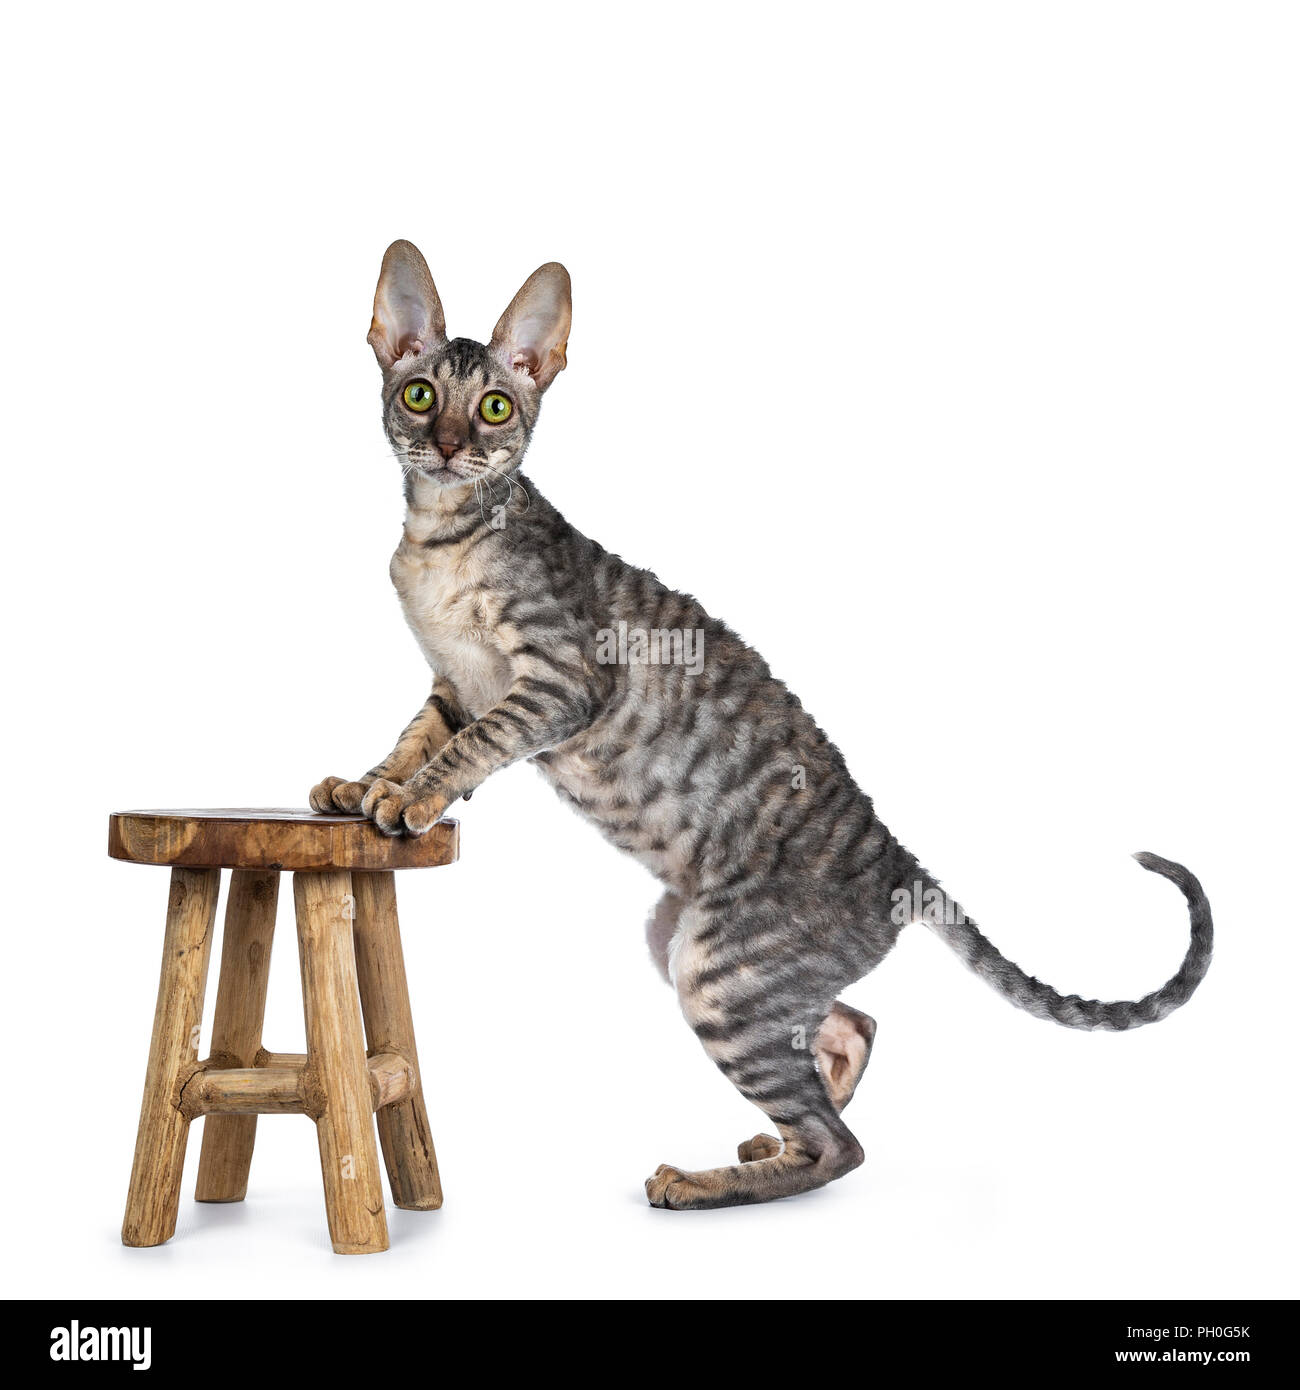 Blue tortie tabby Cornish Rex kitten standing side ways with front paws on little brown wooden stool, looking at camera isolated on white background Stock Photo